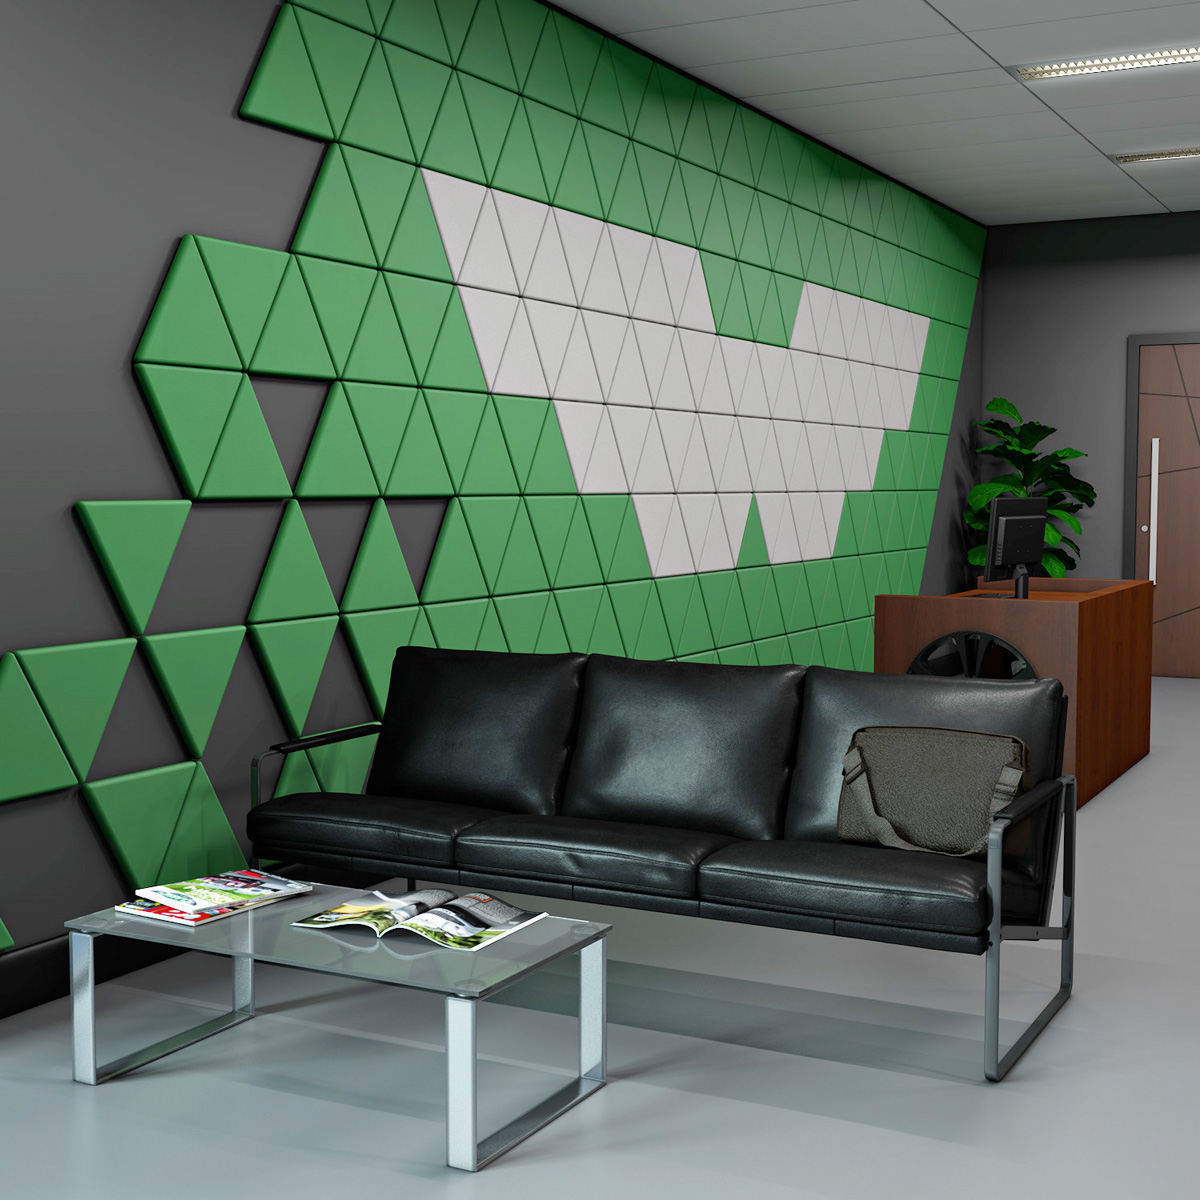 VIRAGE™ Triangular Acoustic Wall Soundproofing Panels Reduce Sound in Open Plan Spaces Such As Reception Areas & Waiting Rooms